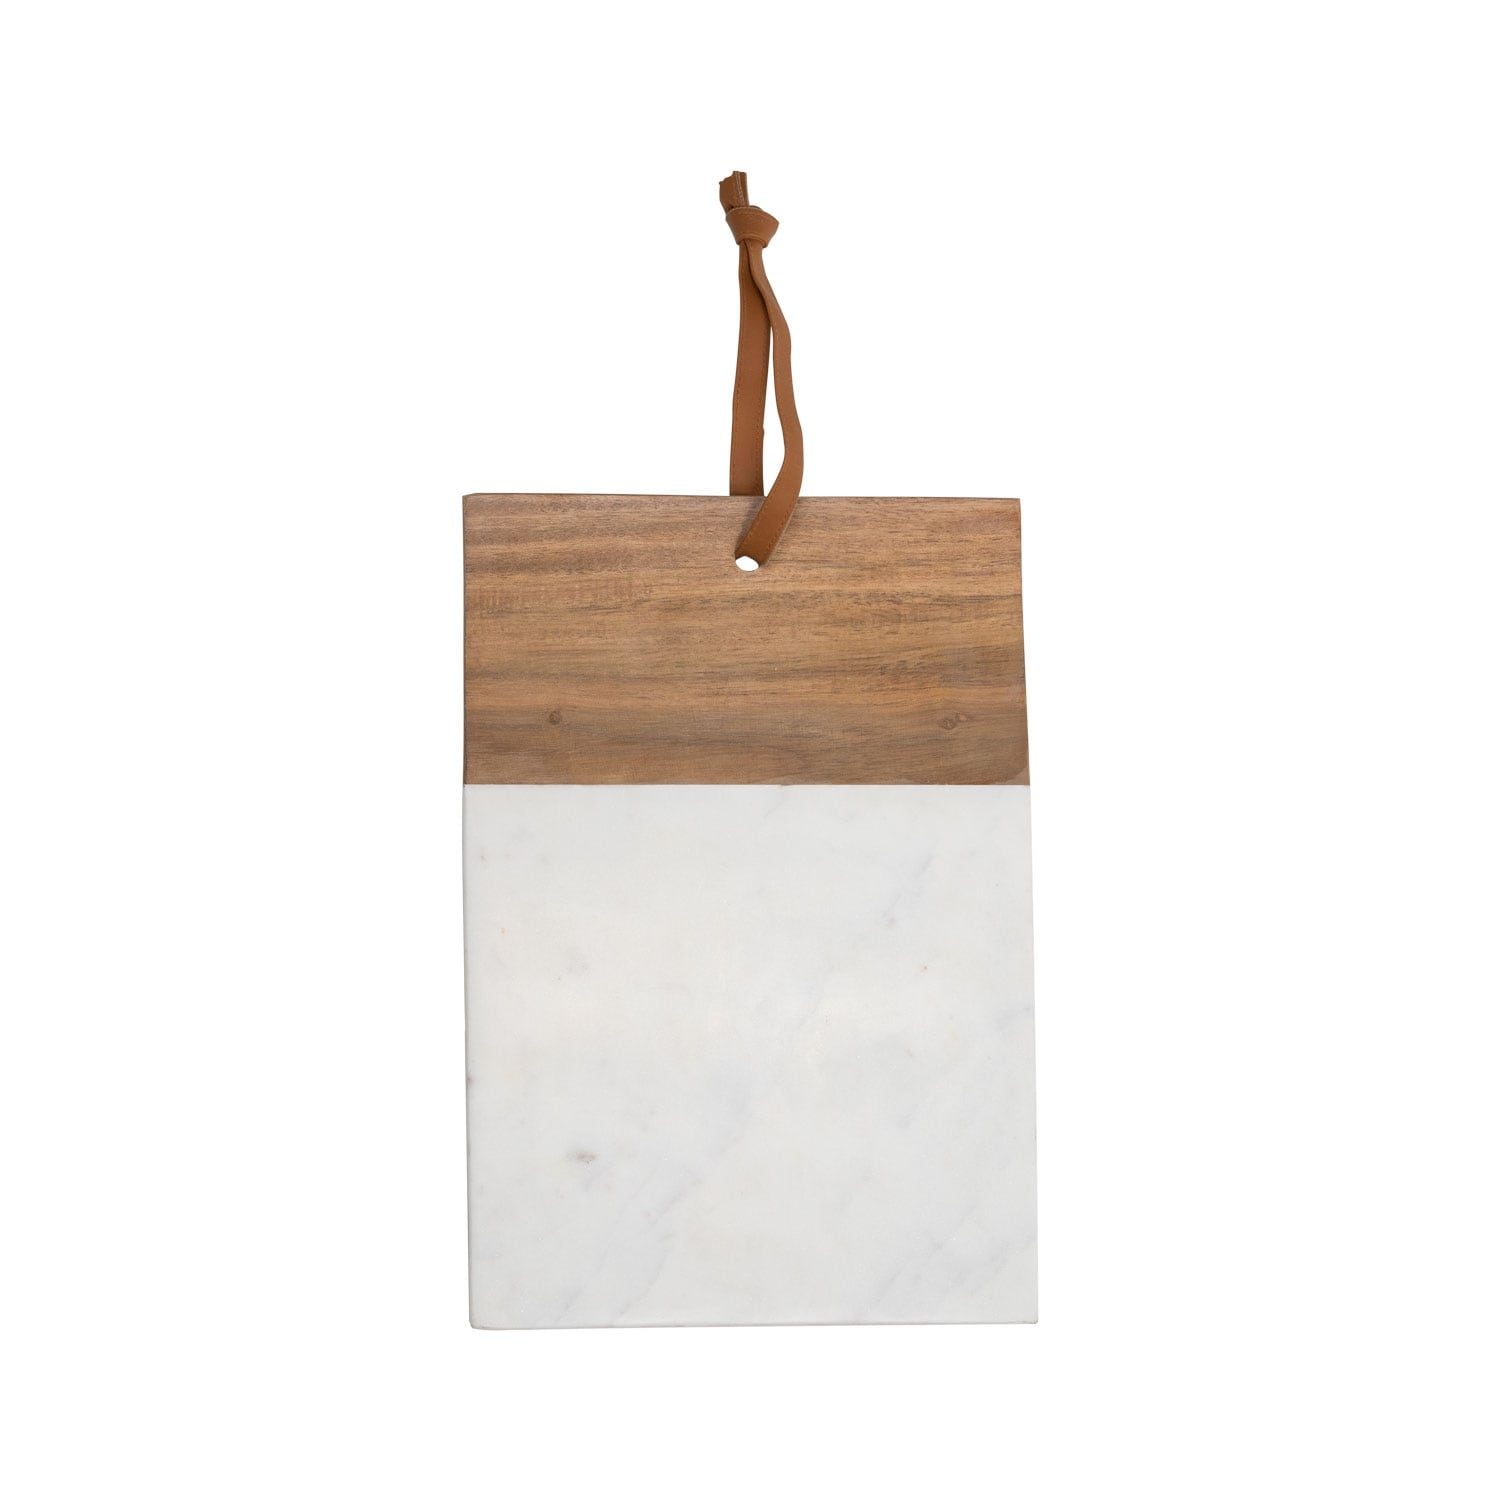 https://ak1.ostkcdn.com/images/products/is/images/direct/6fd0bc7c7fd052ae0ae9484eddf0f2b2a378e62f/Foreside-Home-%26-Garden-Large-Square-White-Marble-and-Wood-Serving-Cutting-Board.jpg